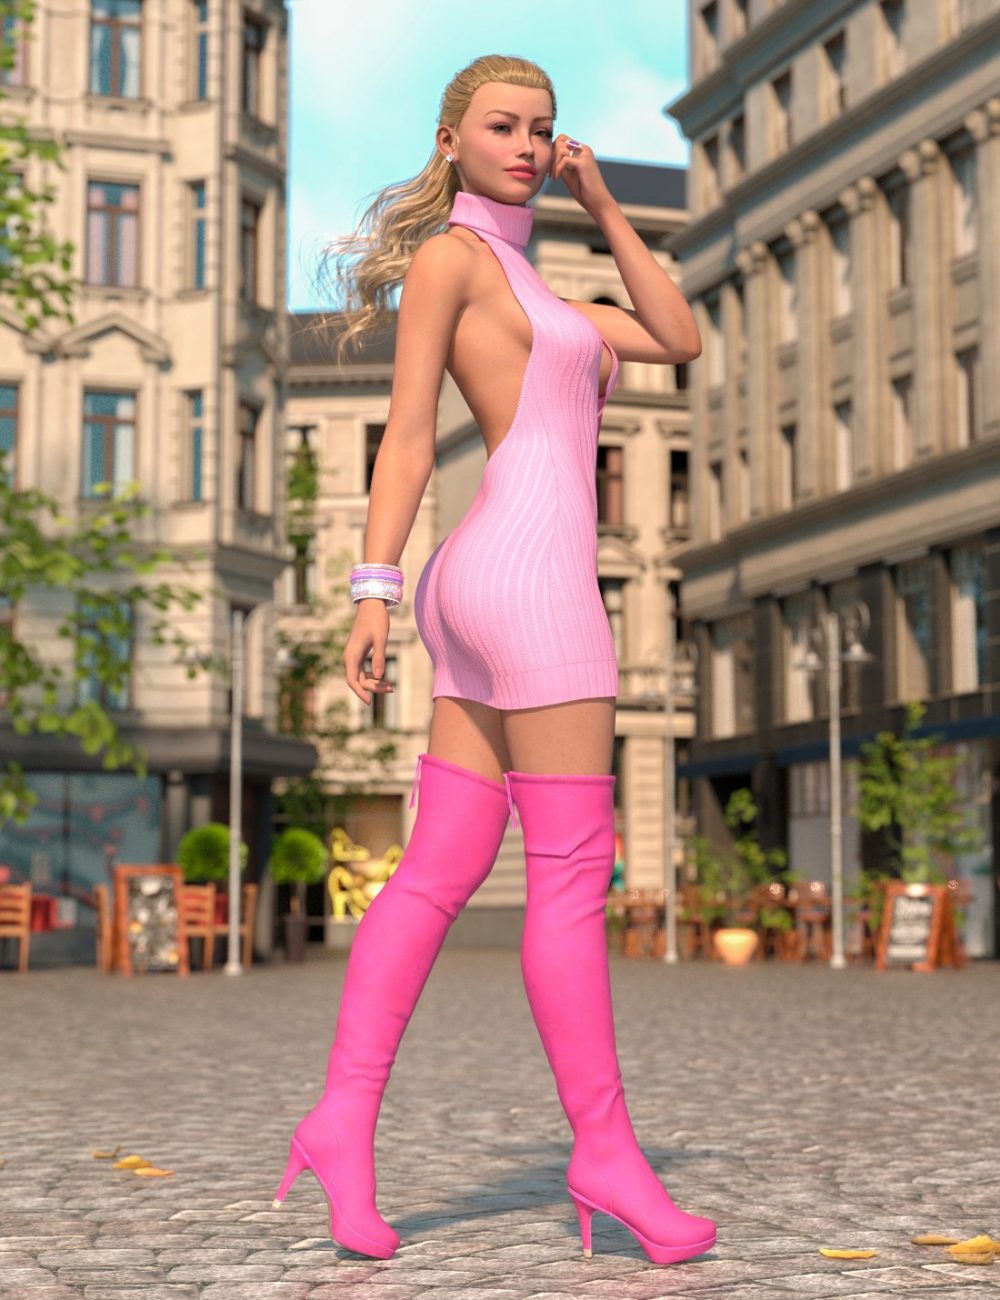 Simply Sexy dForce Outfit for Genesis 9 Base Feminine